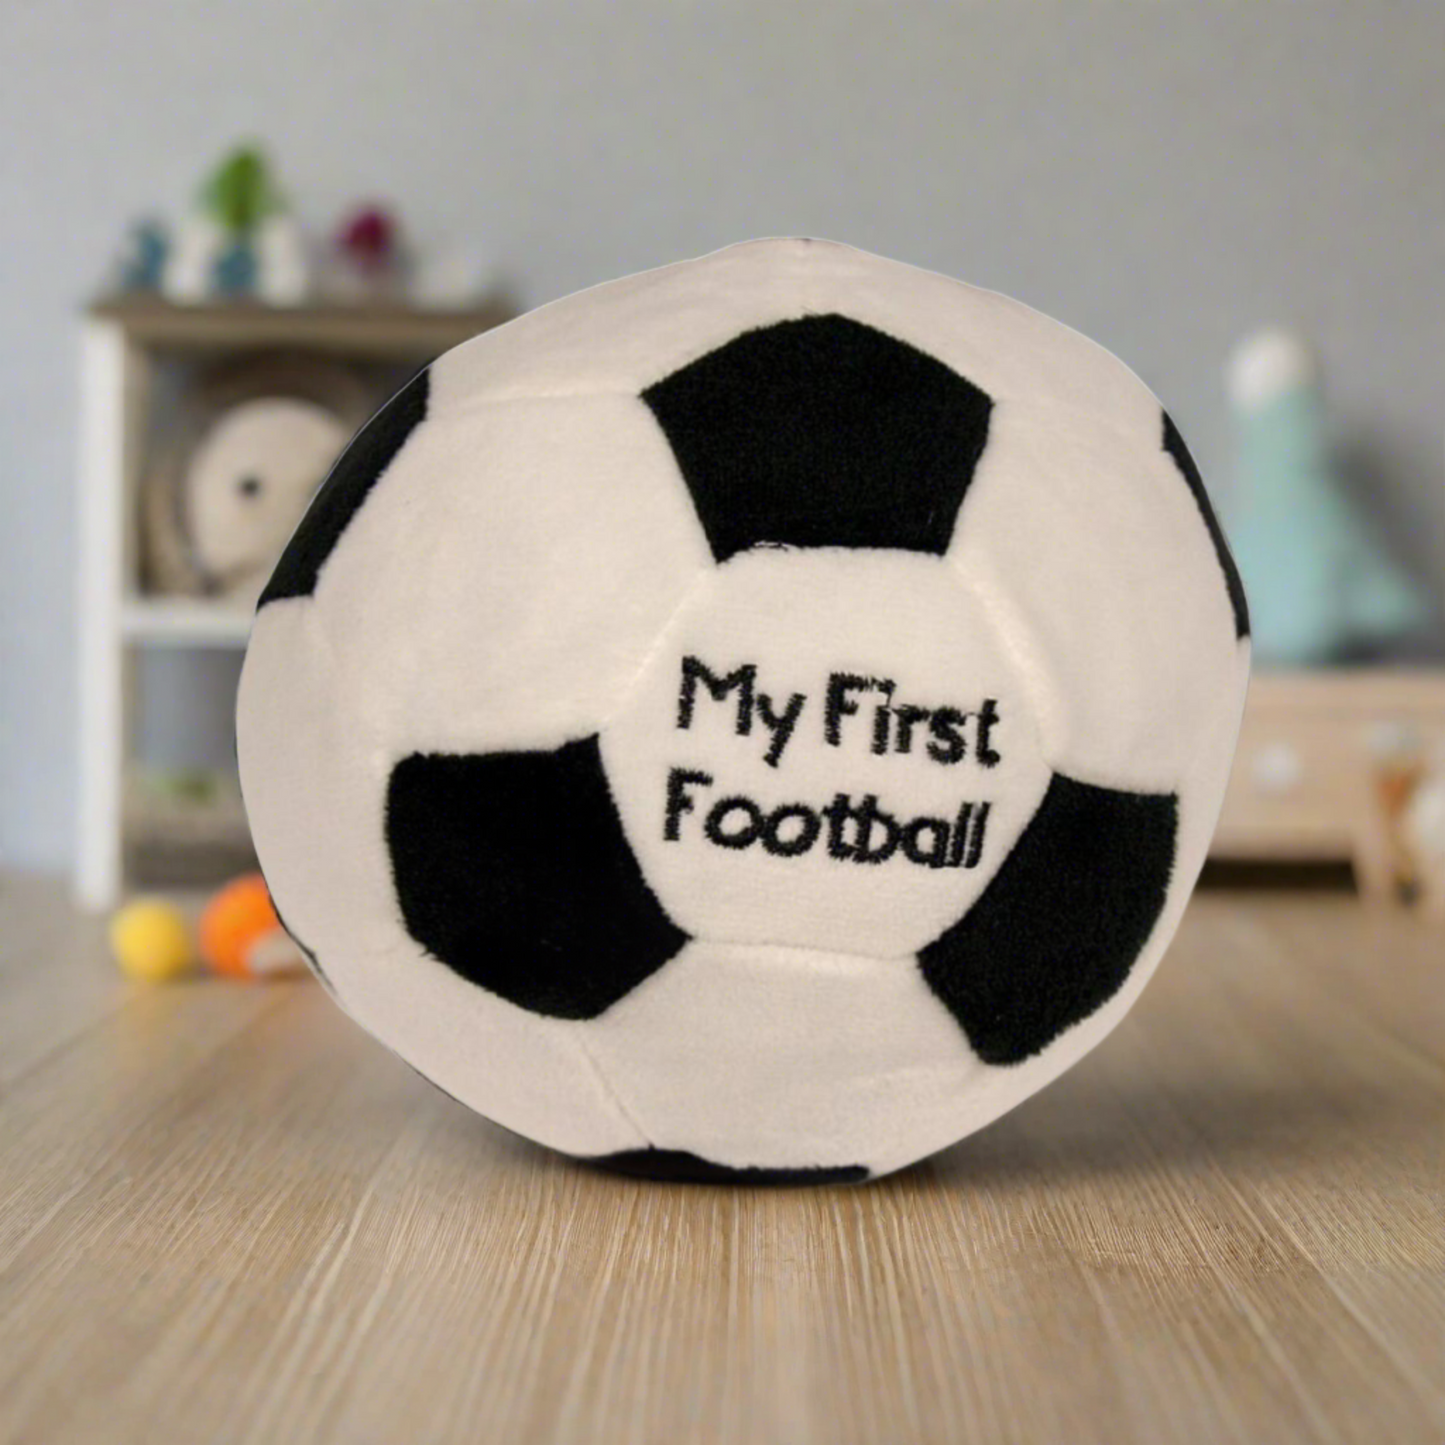 Soft baby toy, my first football. Measuring 15cm made from soft plush materials with a rattle sound within. (Featured in a nursery background)